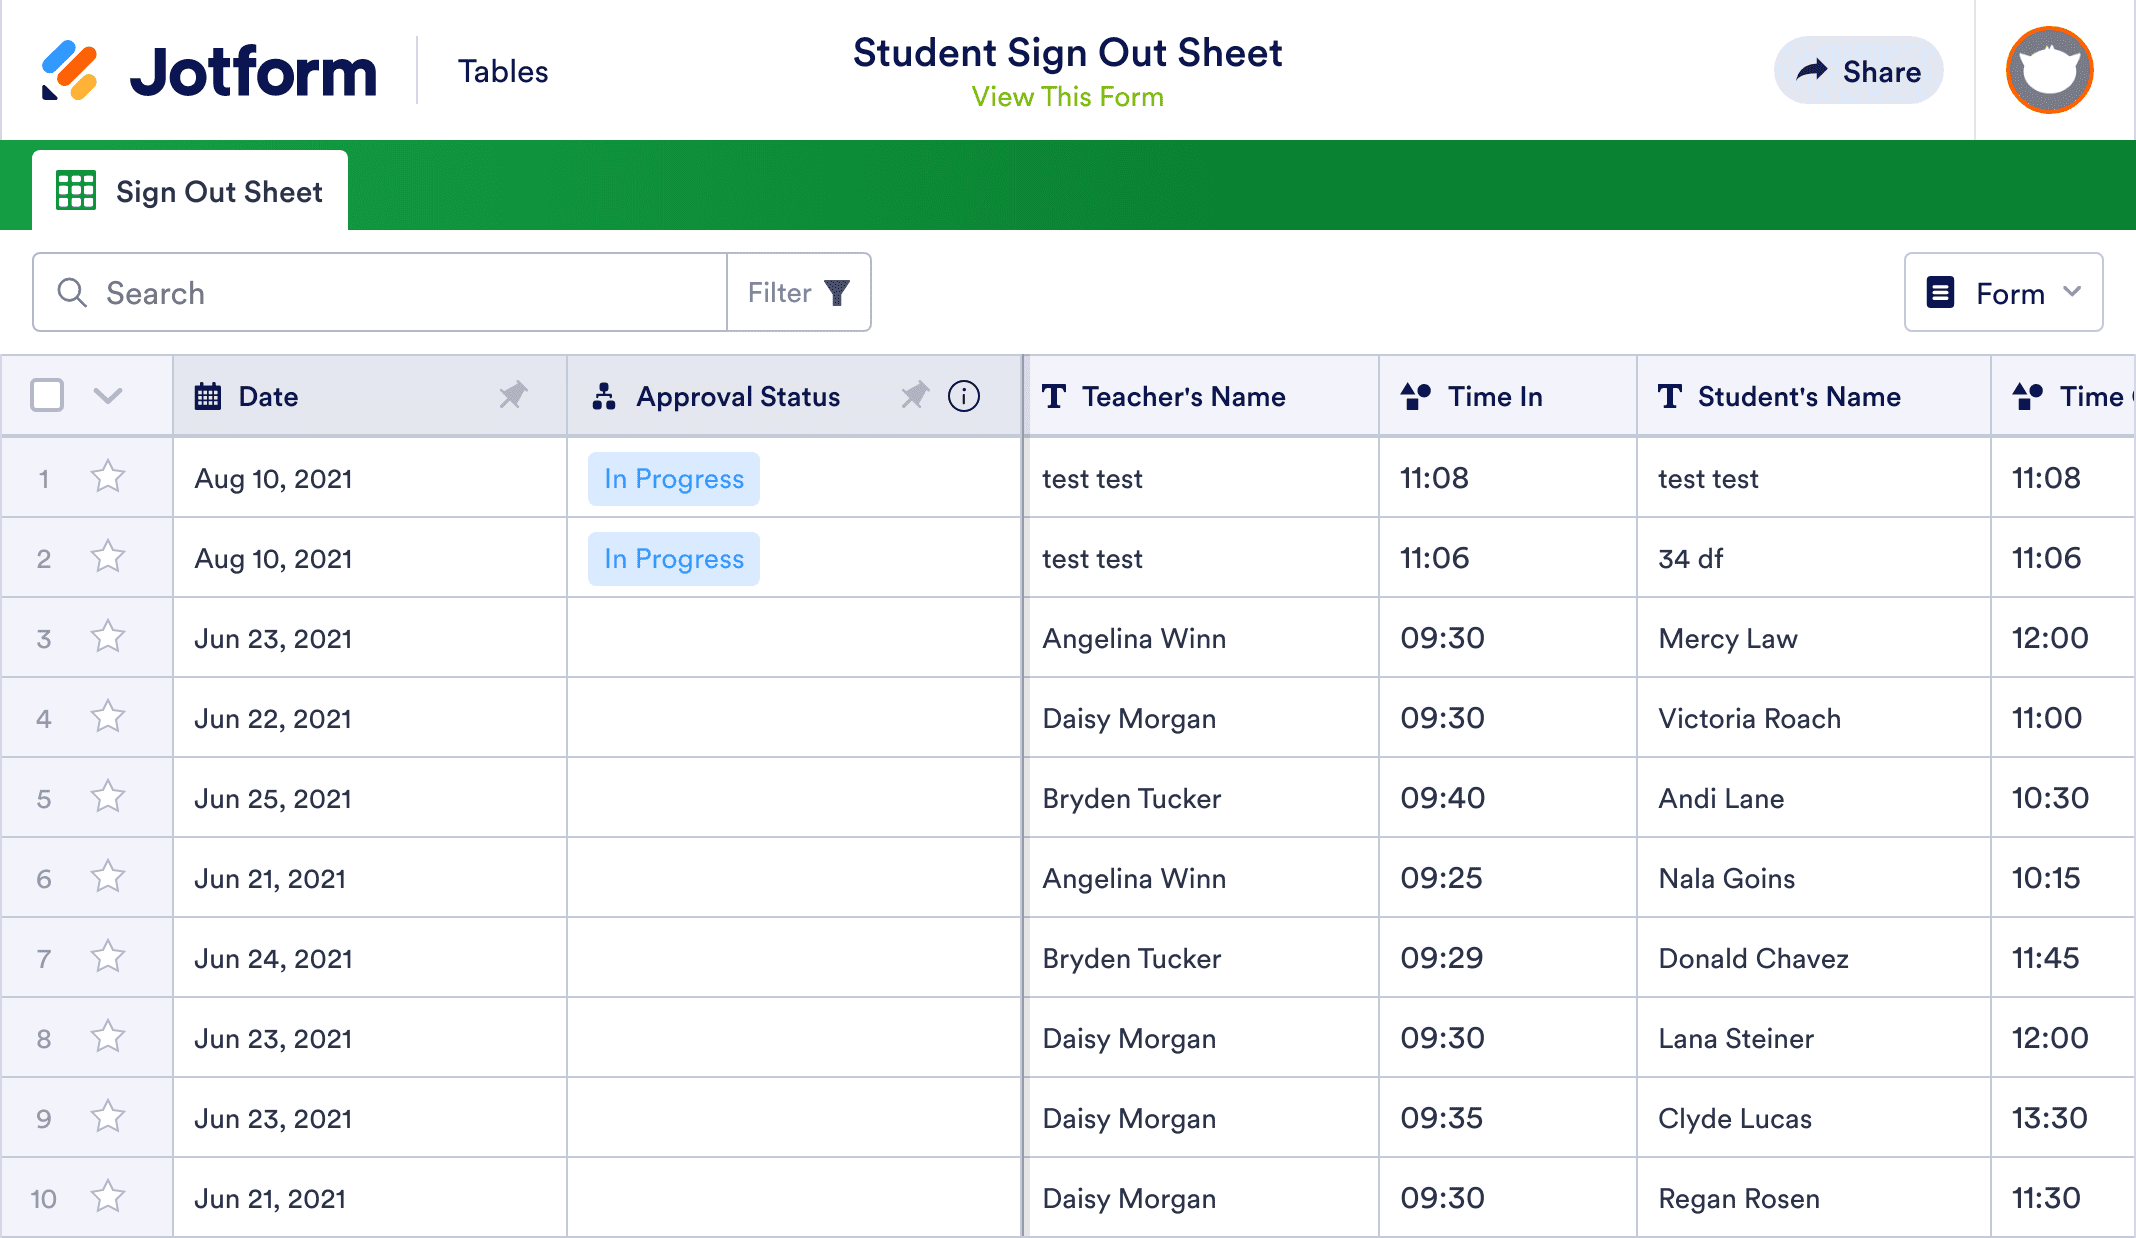 Student Sign Out Sheet